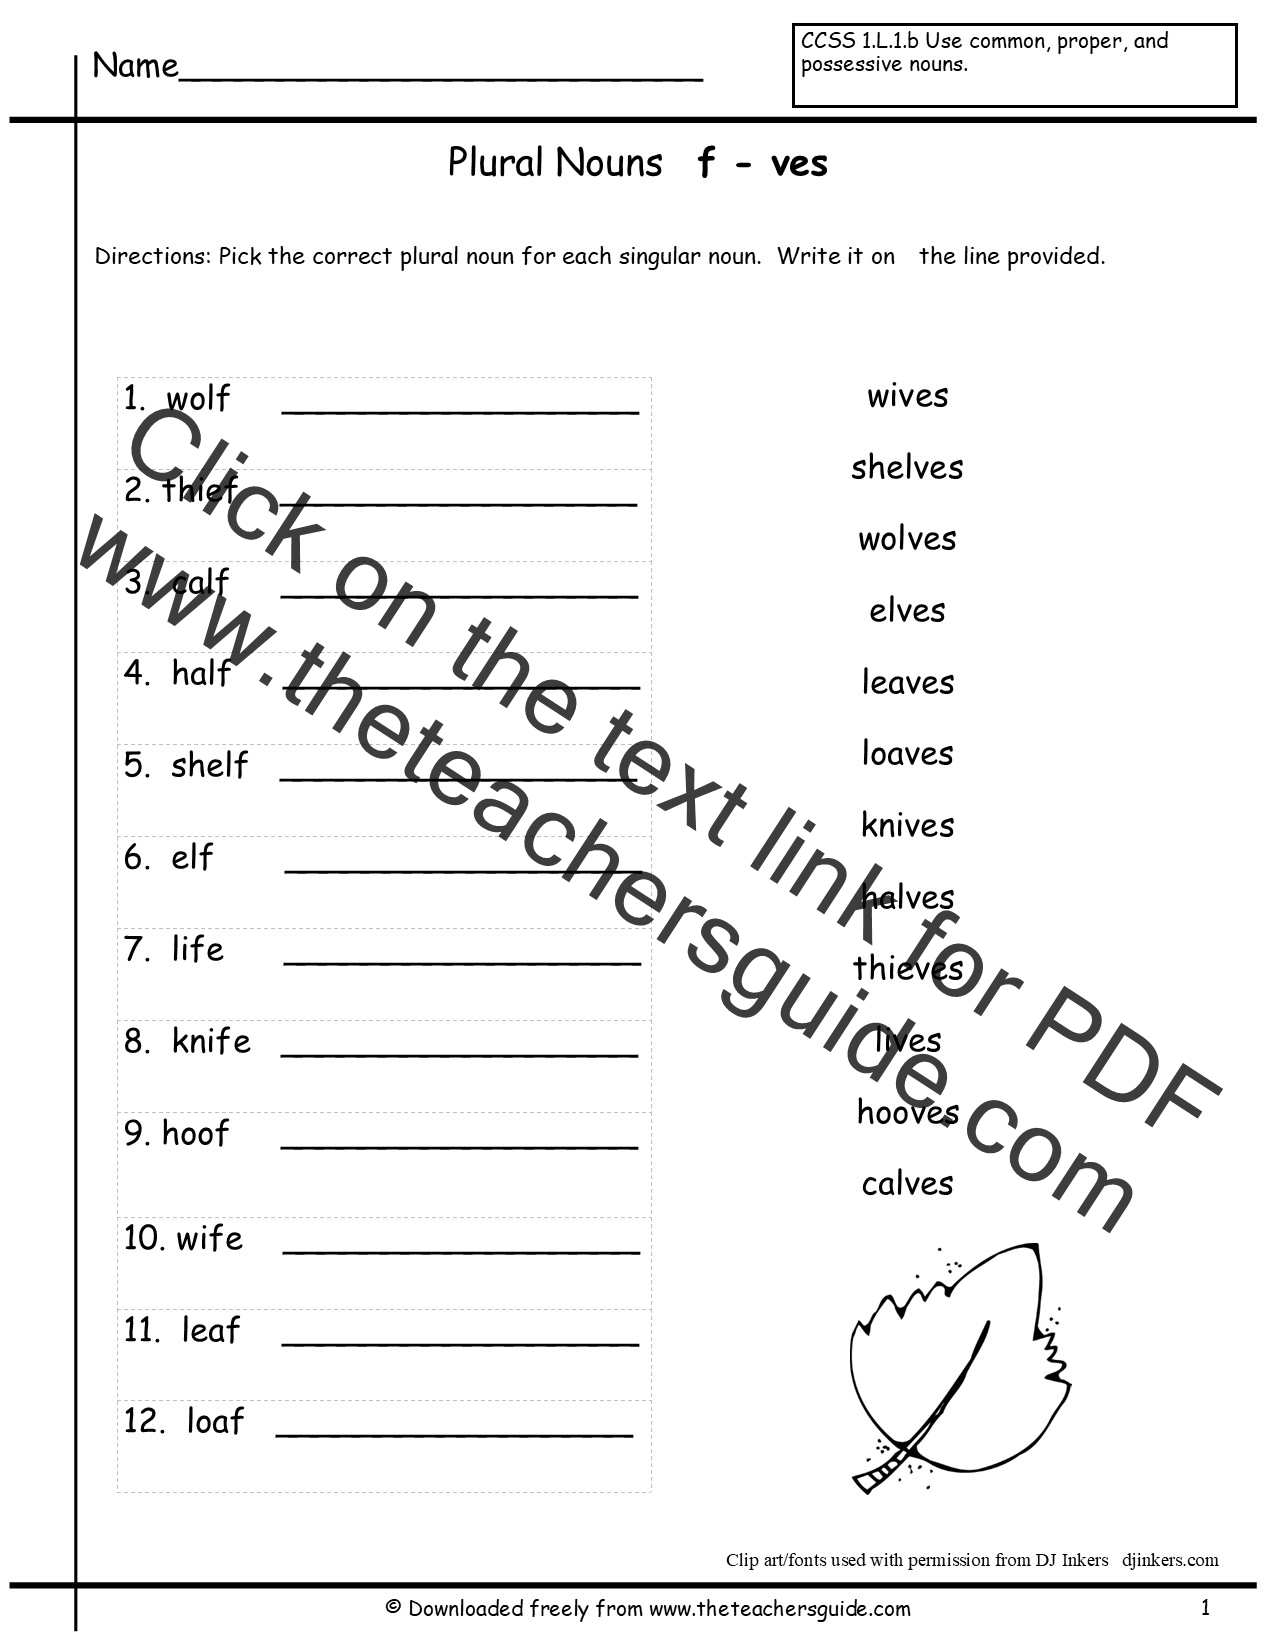 Singular And Plural Nouns Worksheets From The Teacher s Guide